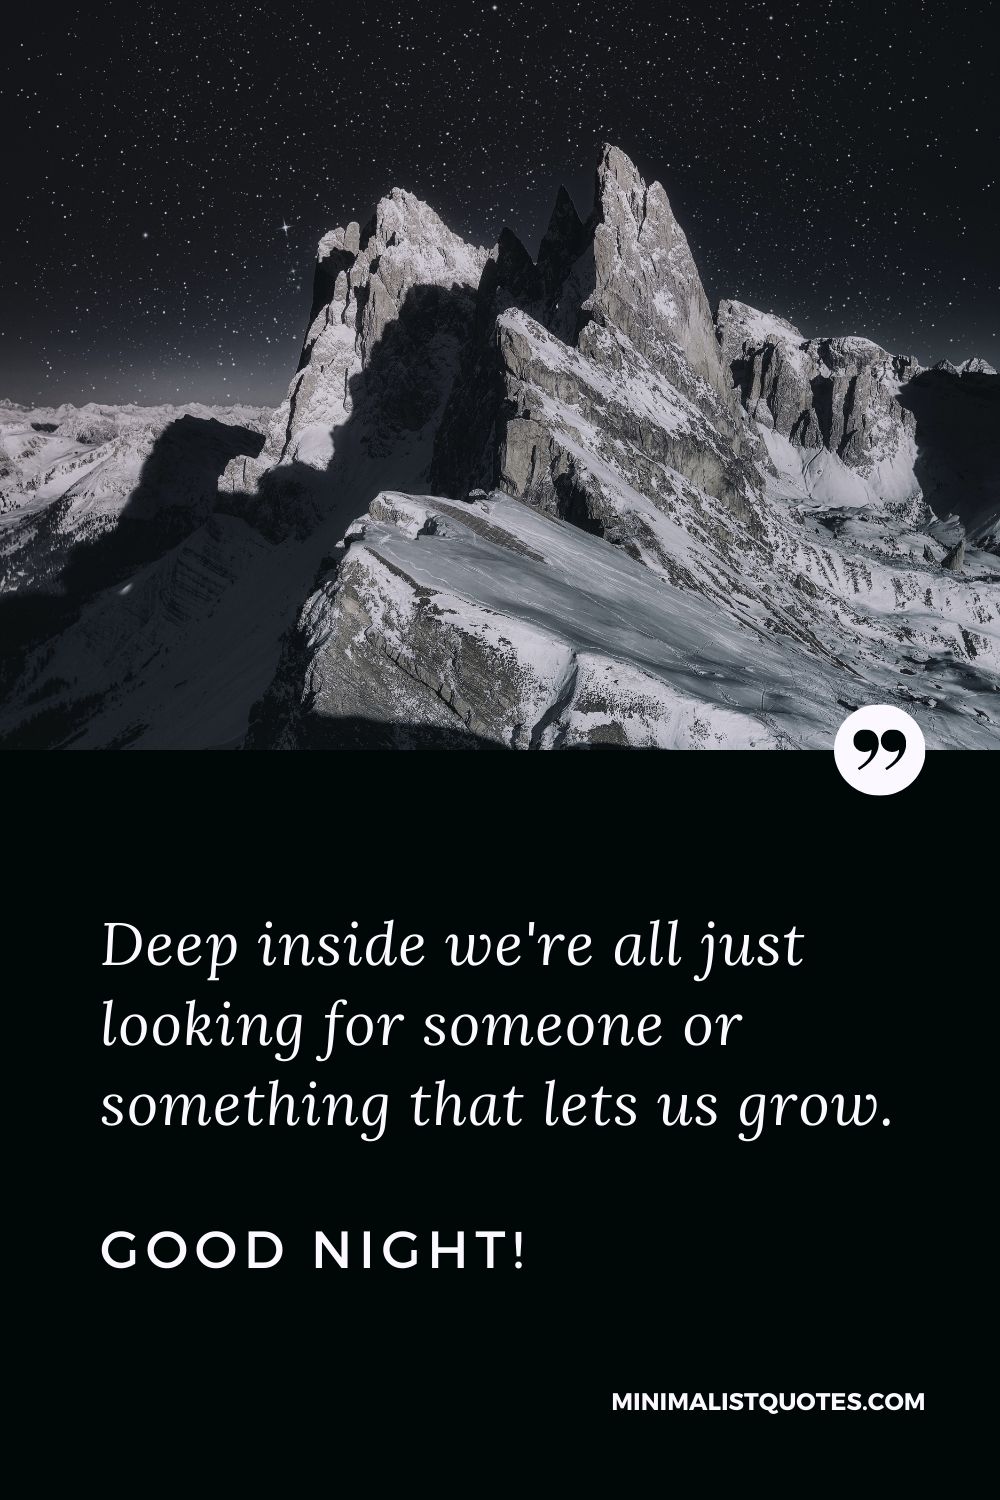 Good Night Quote, Wish & Message With Image: Deep inside we're all just looking for someone or something that lets us grow. Good Night!